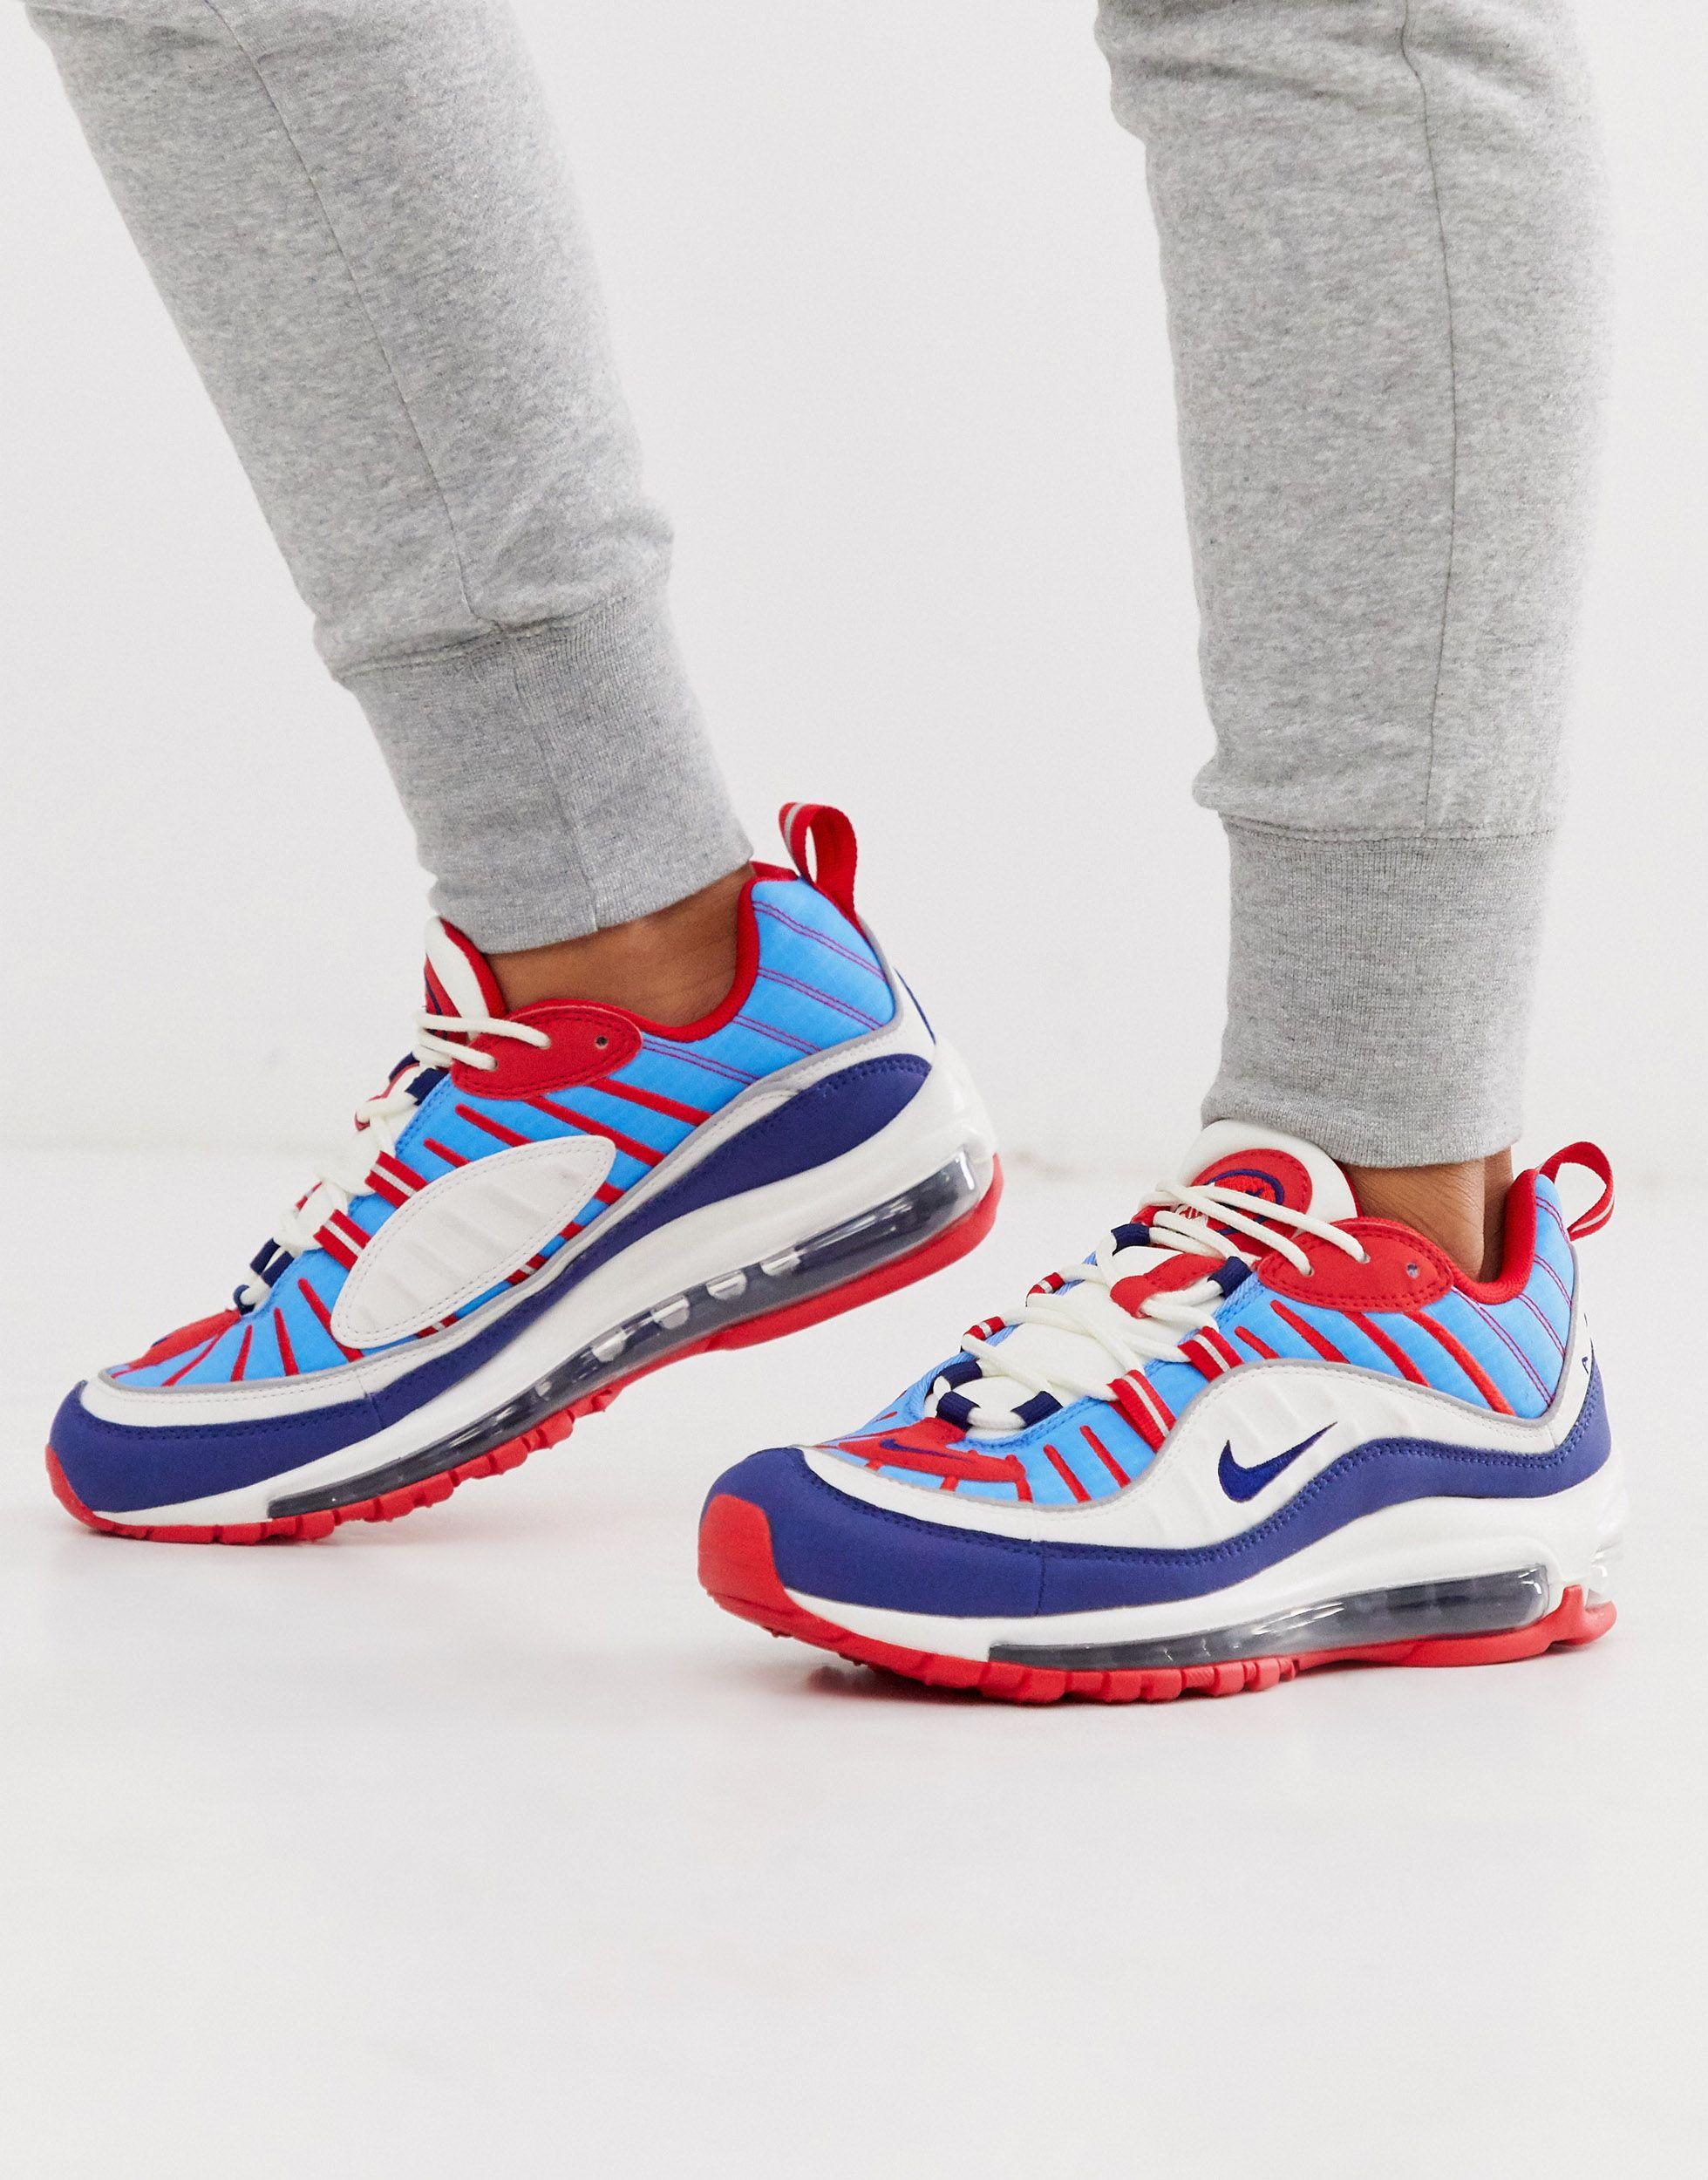 Nike Rubber Red White And Blue Air Max 98 Trainers - Lyst